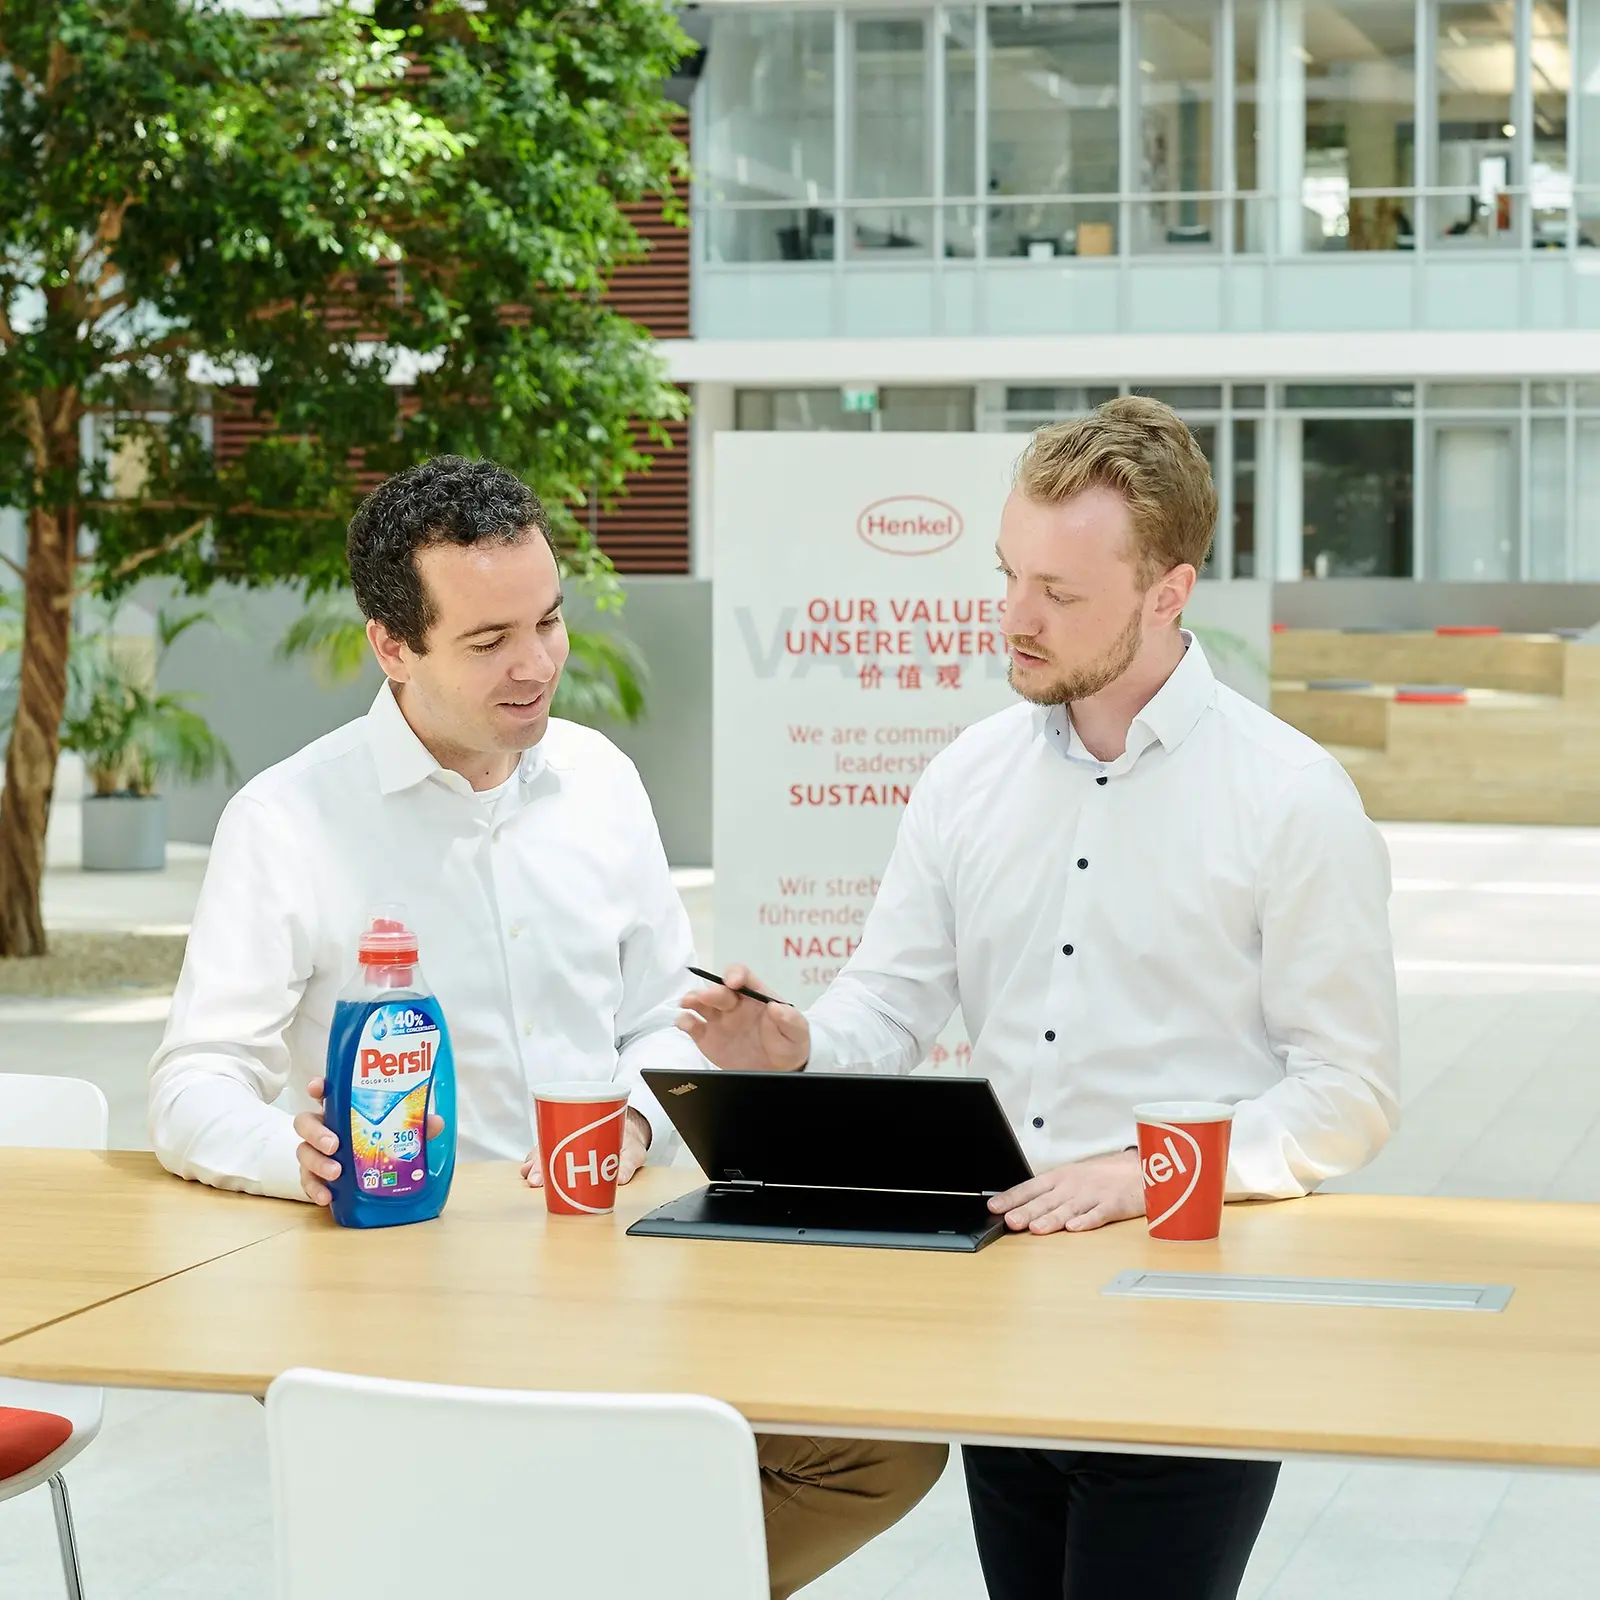 Two men standing at a table with a Persil bottle and a laptop